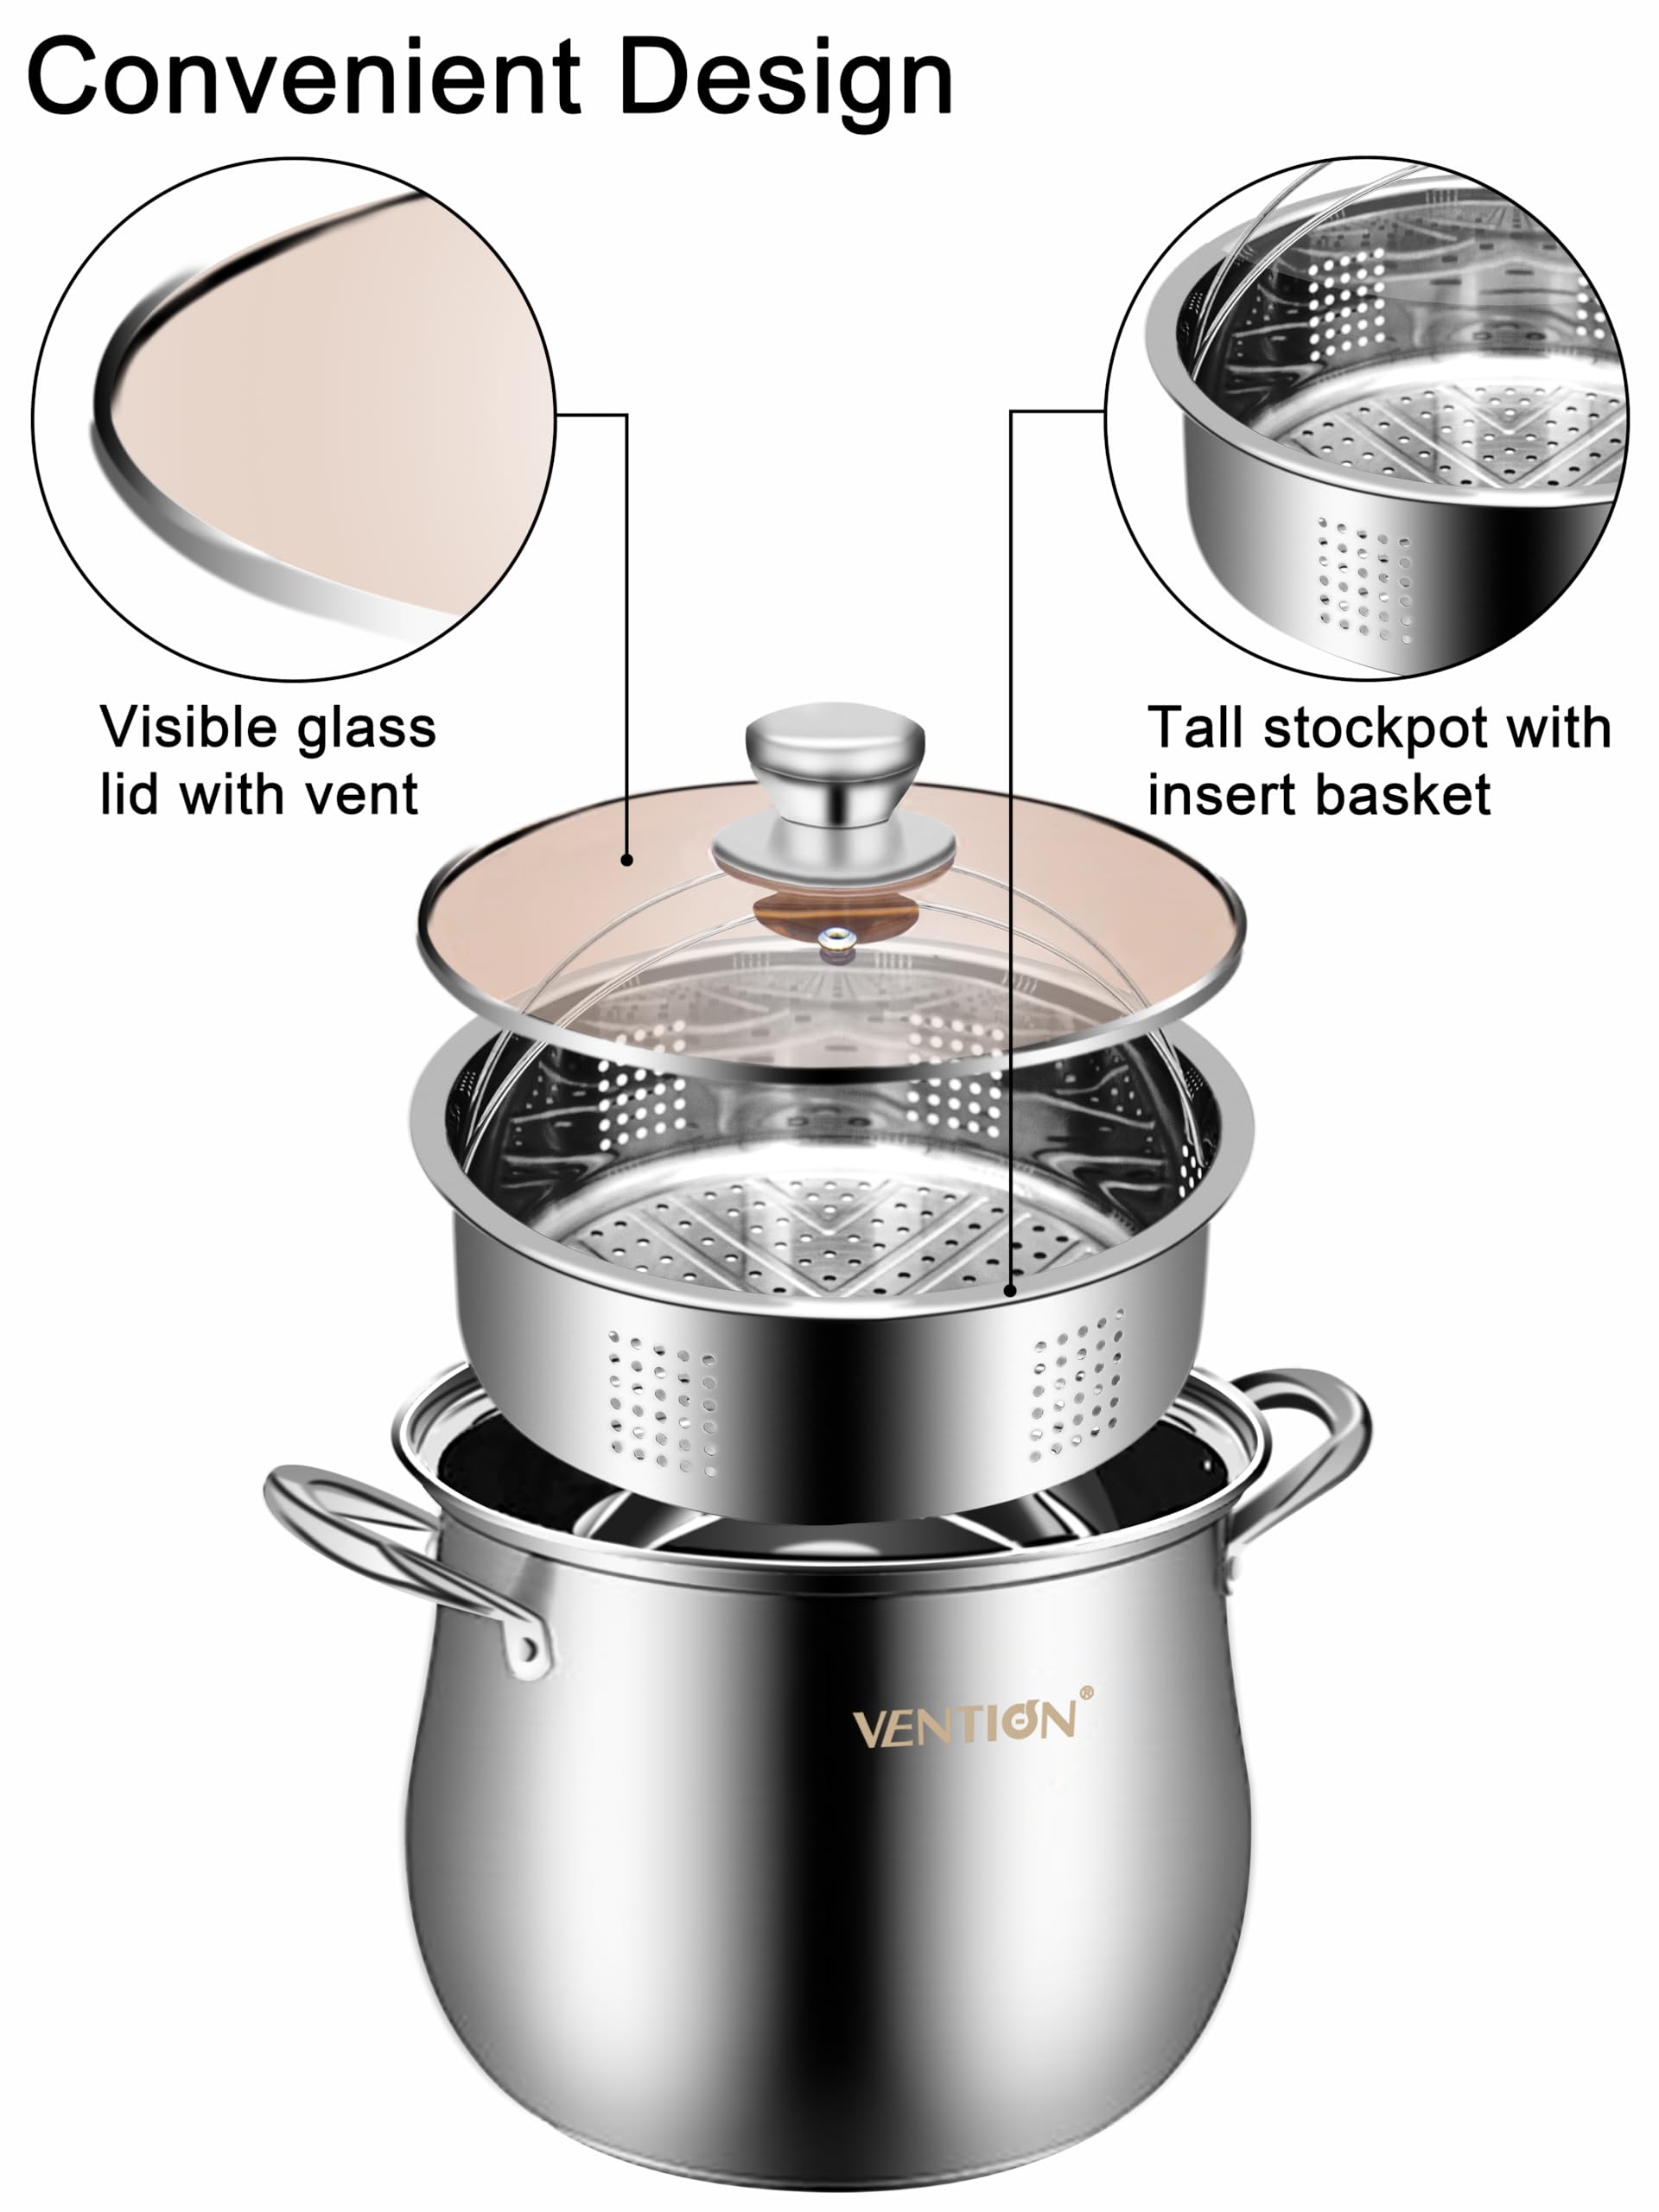 VENTION Stainless Steel Stock Pot with Steamer, 7.8 Quart Stockpot with Lid